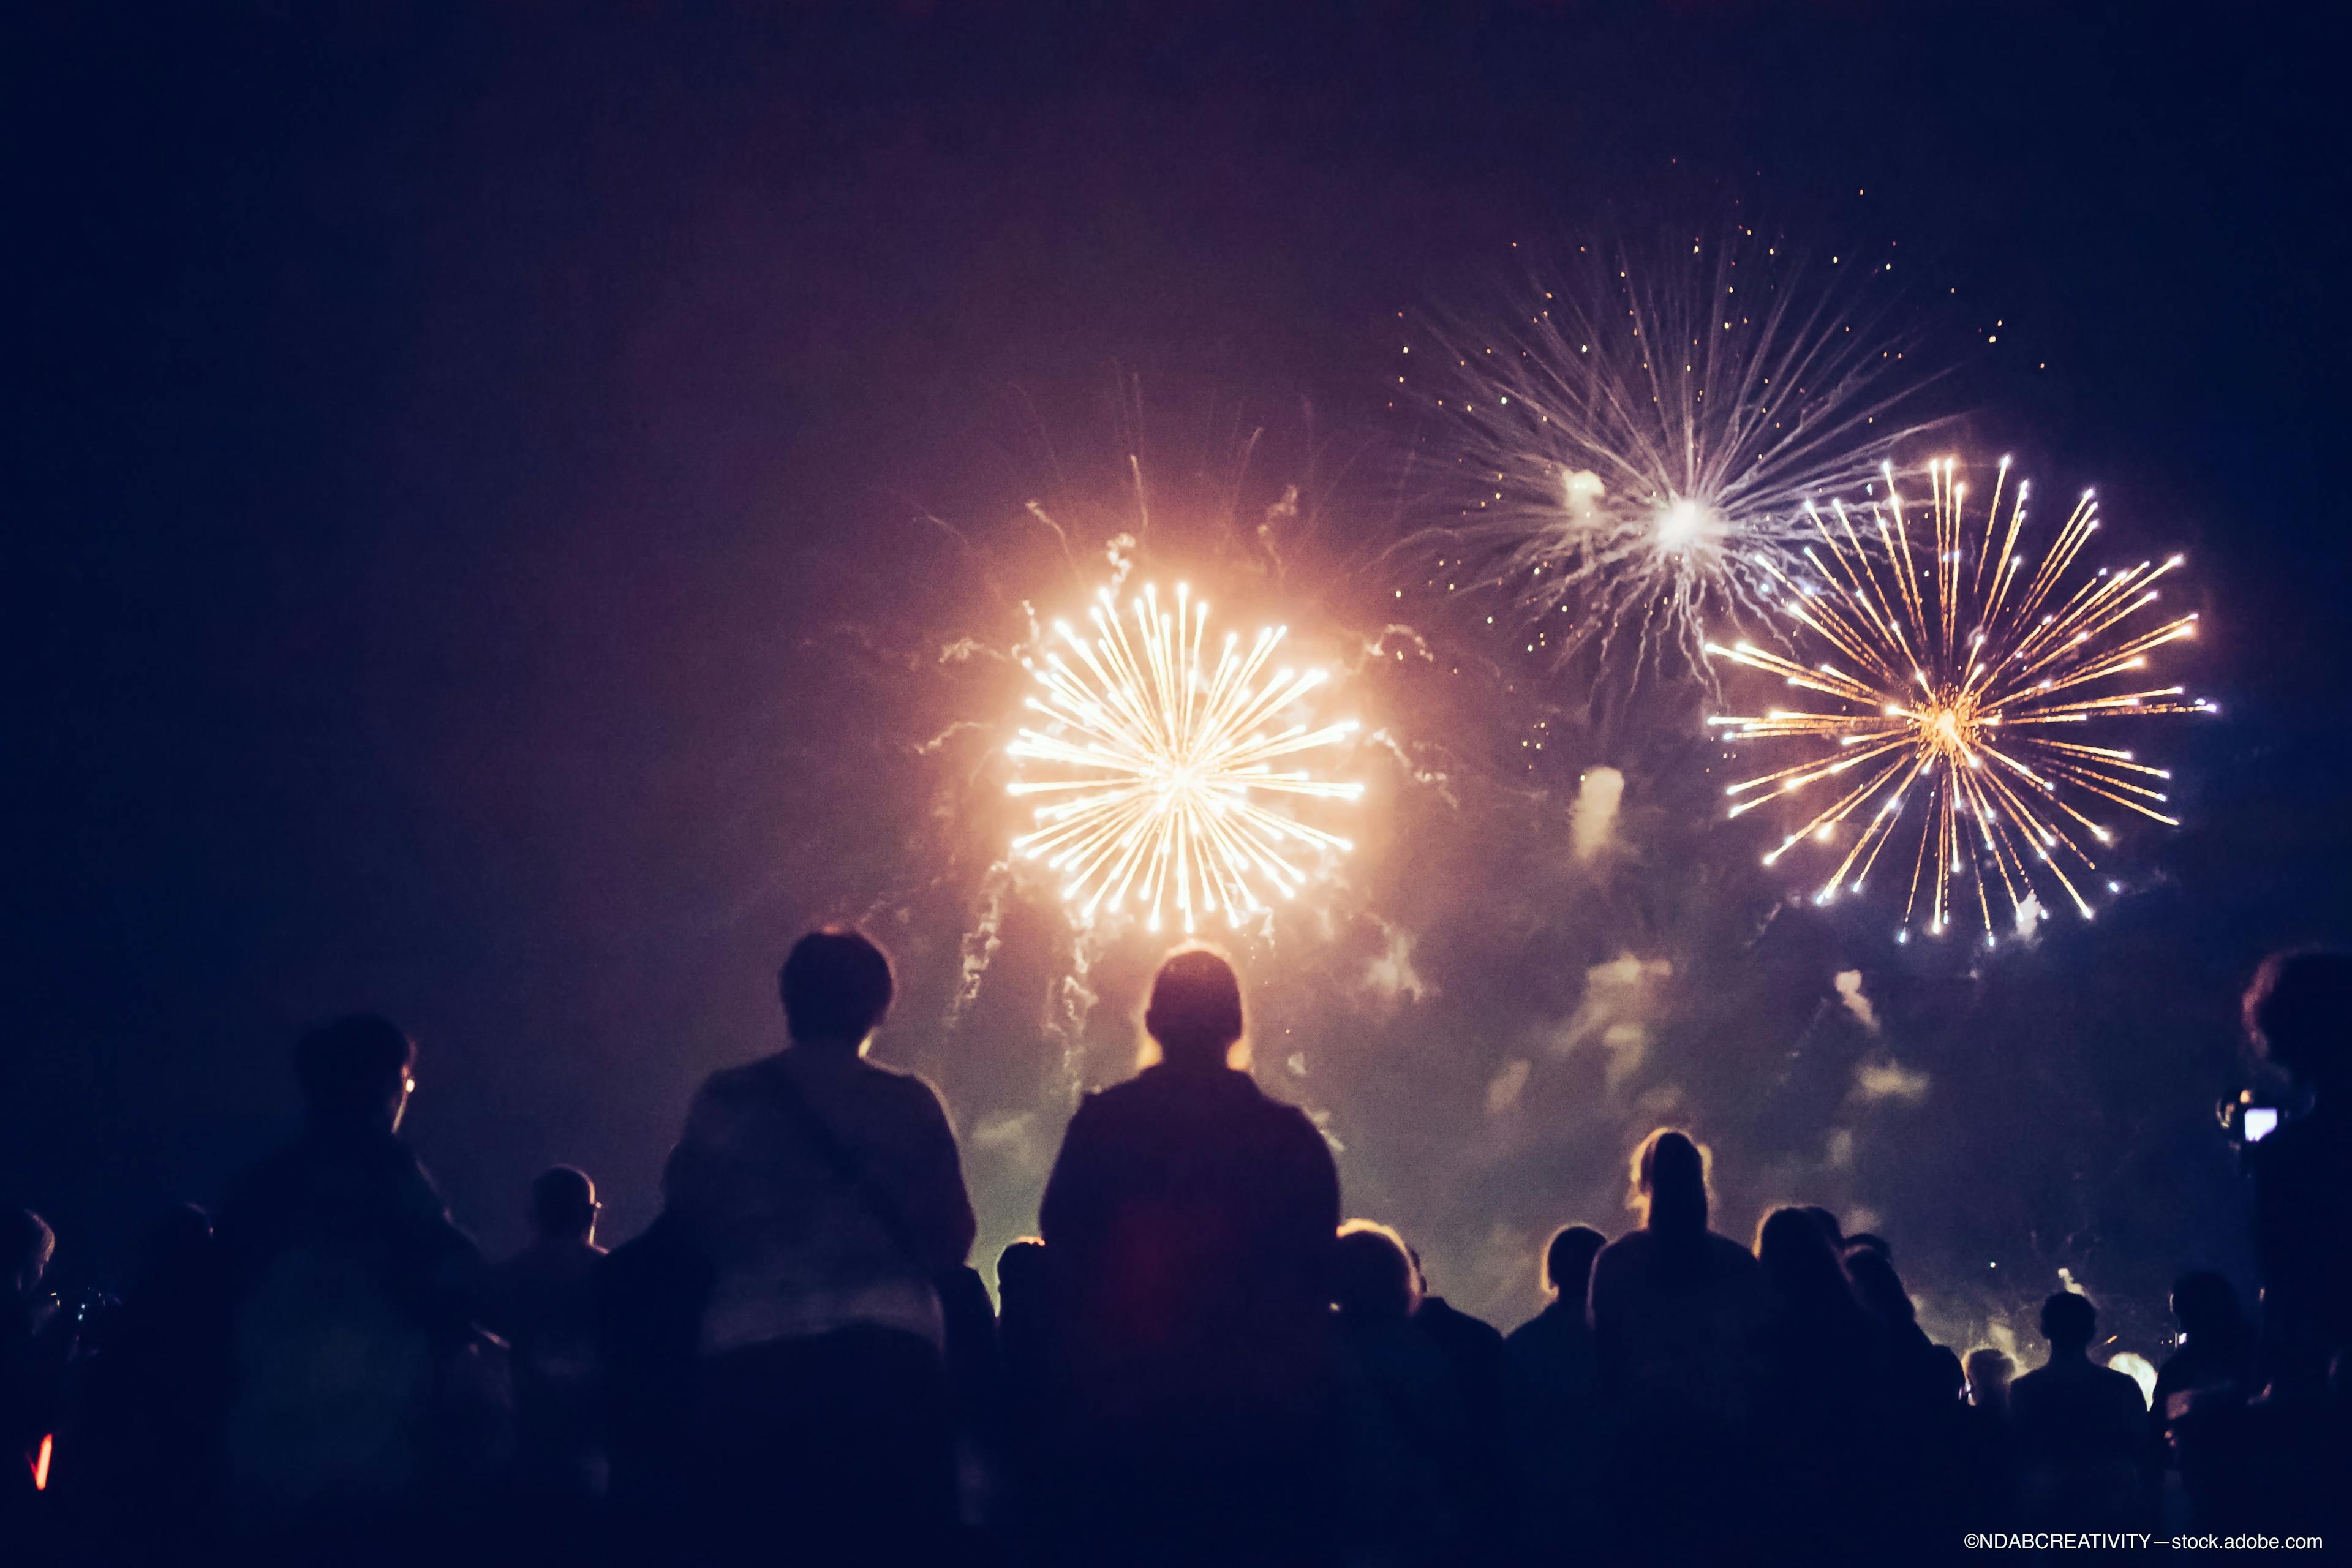 Fireworks and eye safety poll: Which injuries do ophthalmologists see most often?